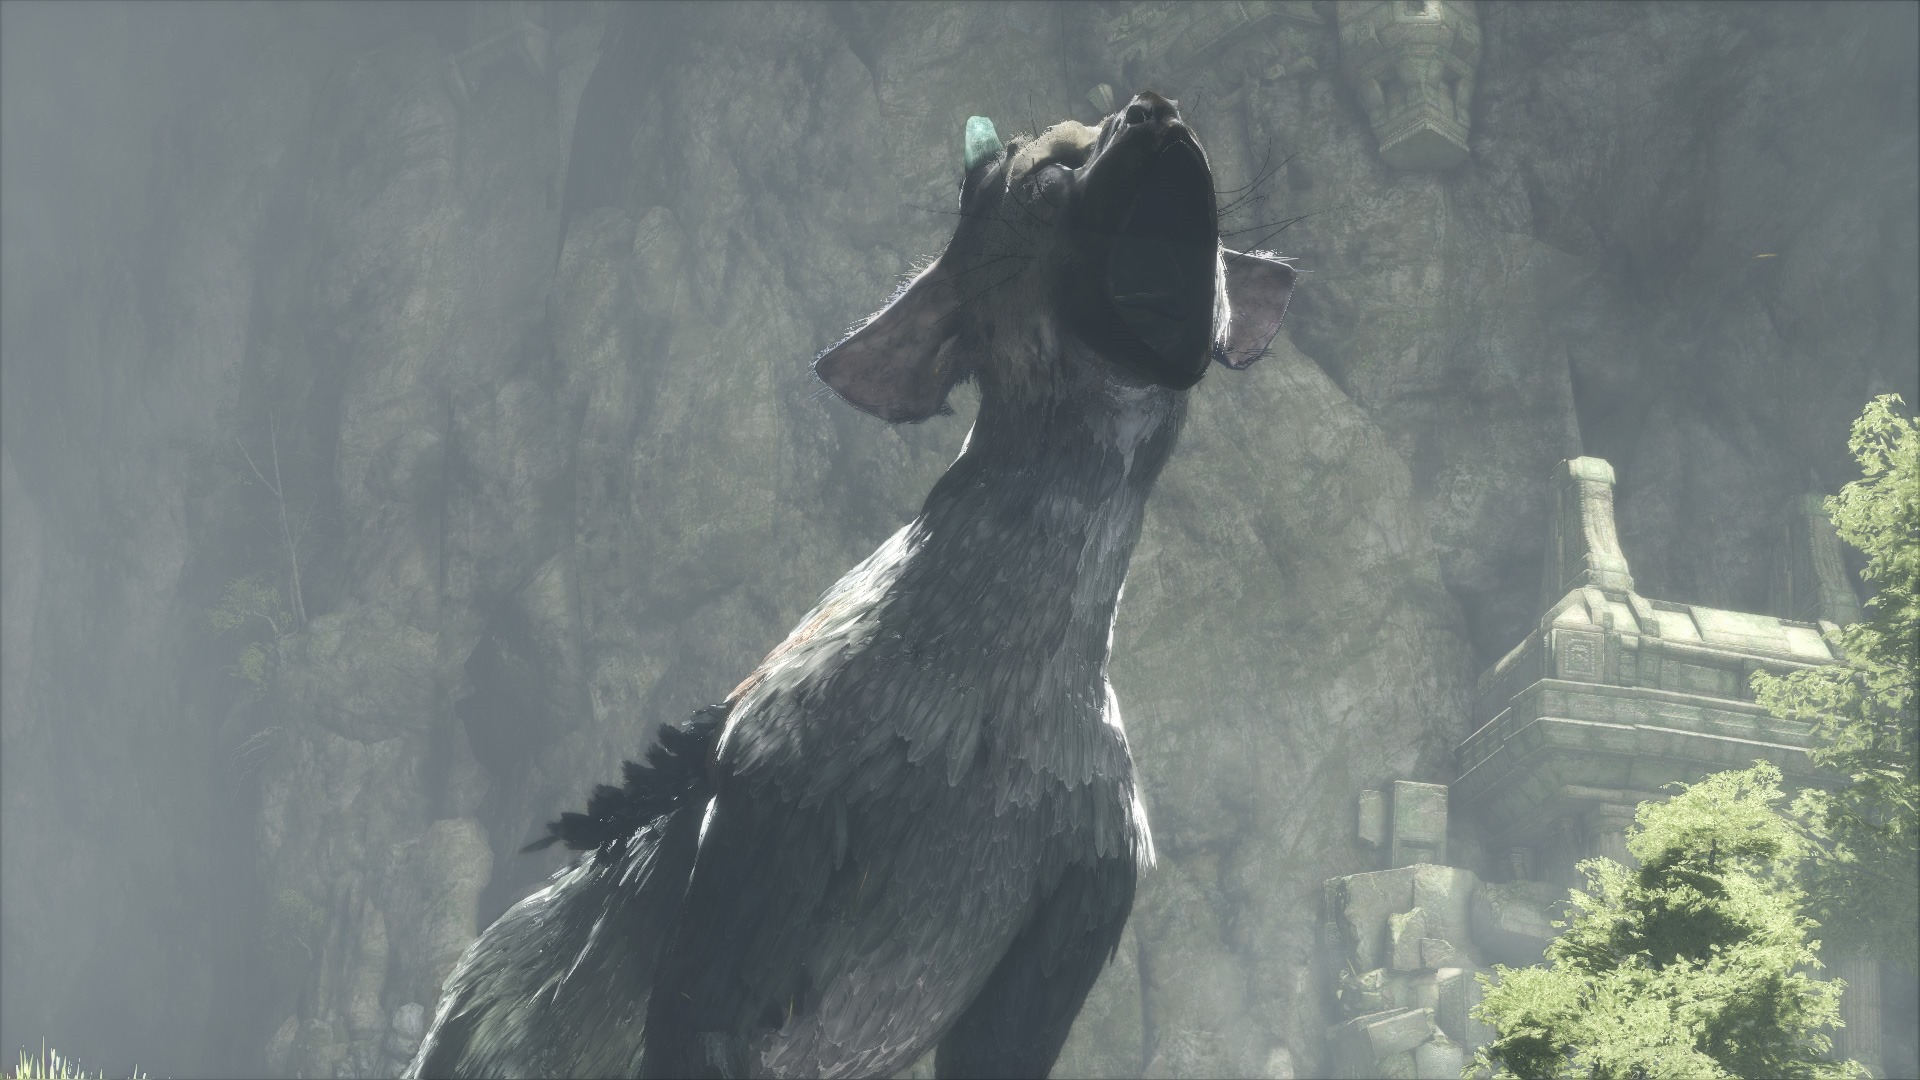 The Last Guardian Walkthrough - Part 2 - Escaping the cave with